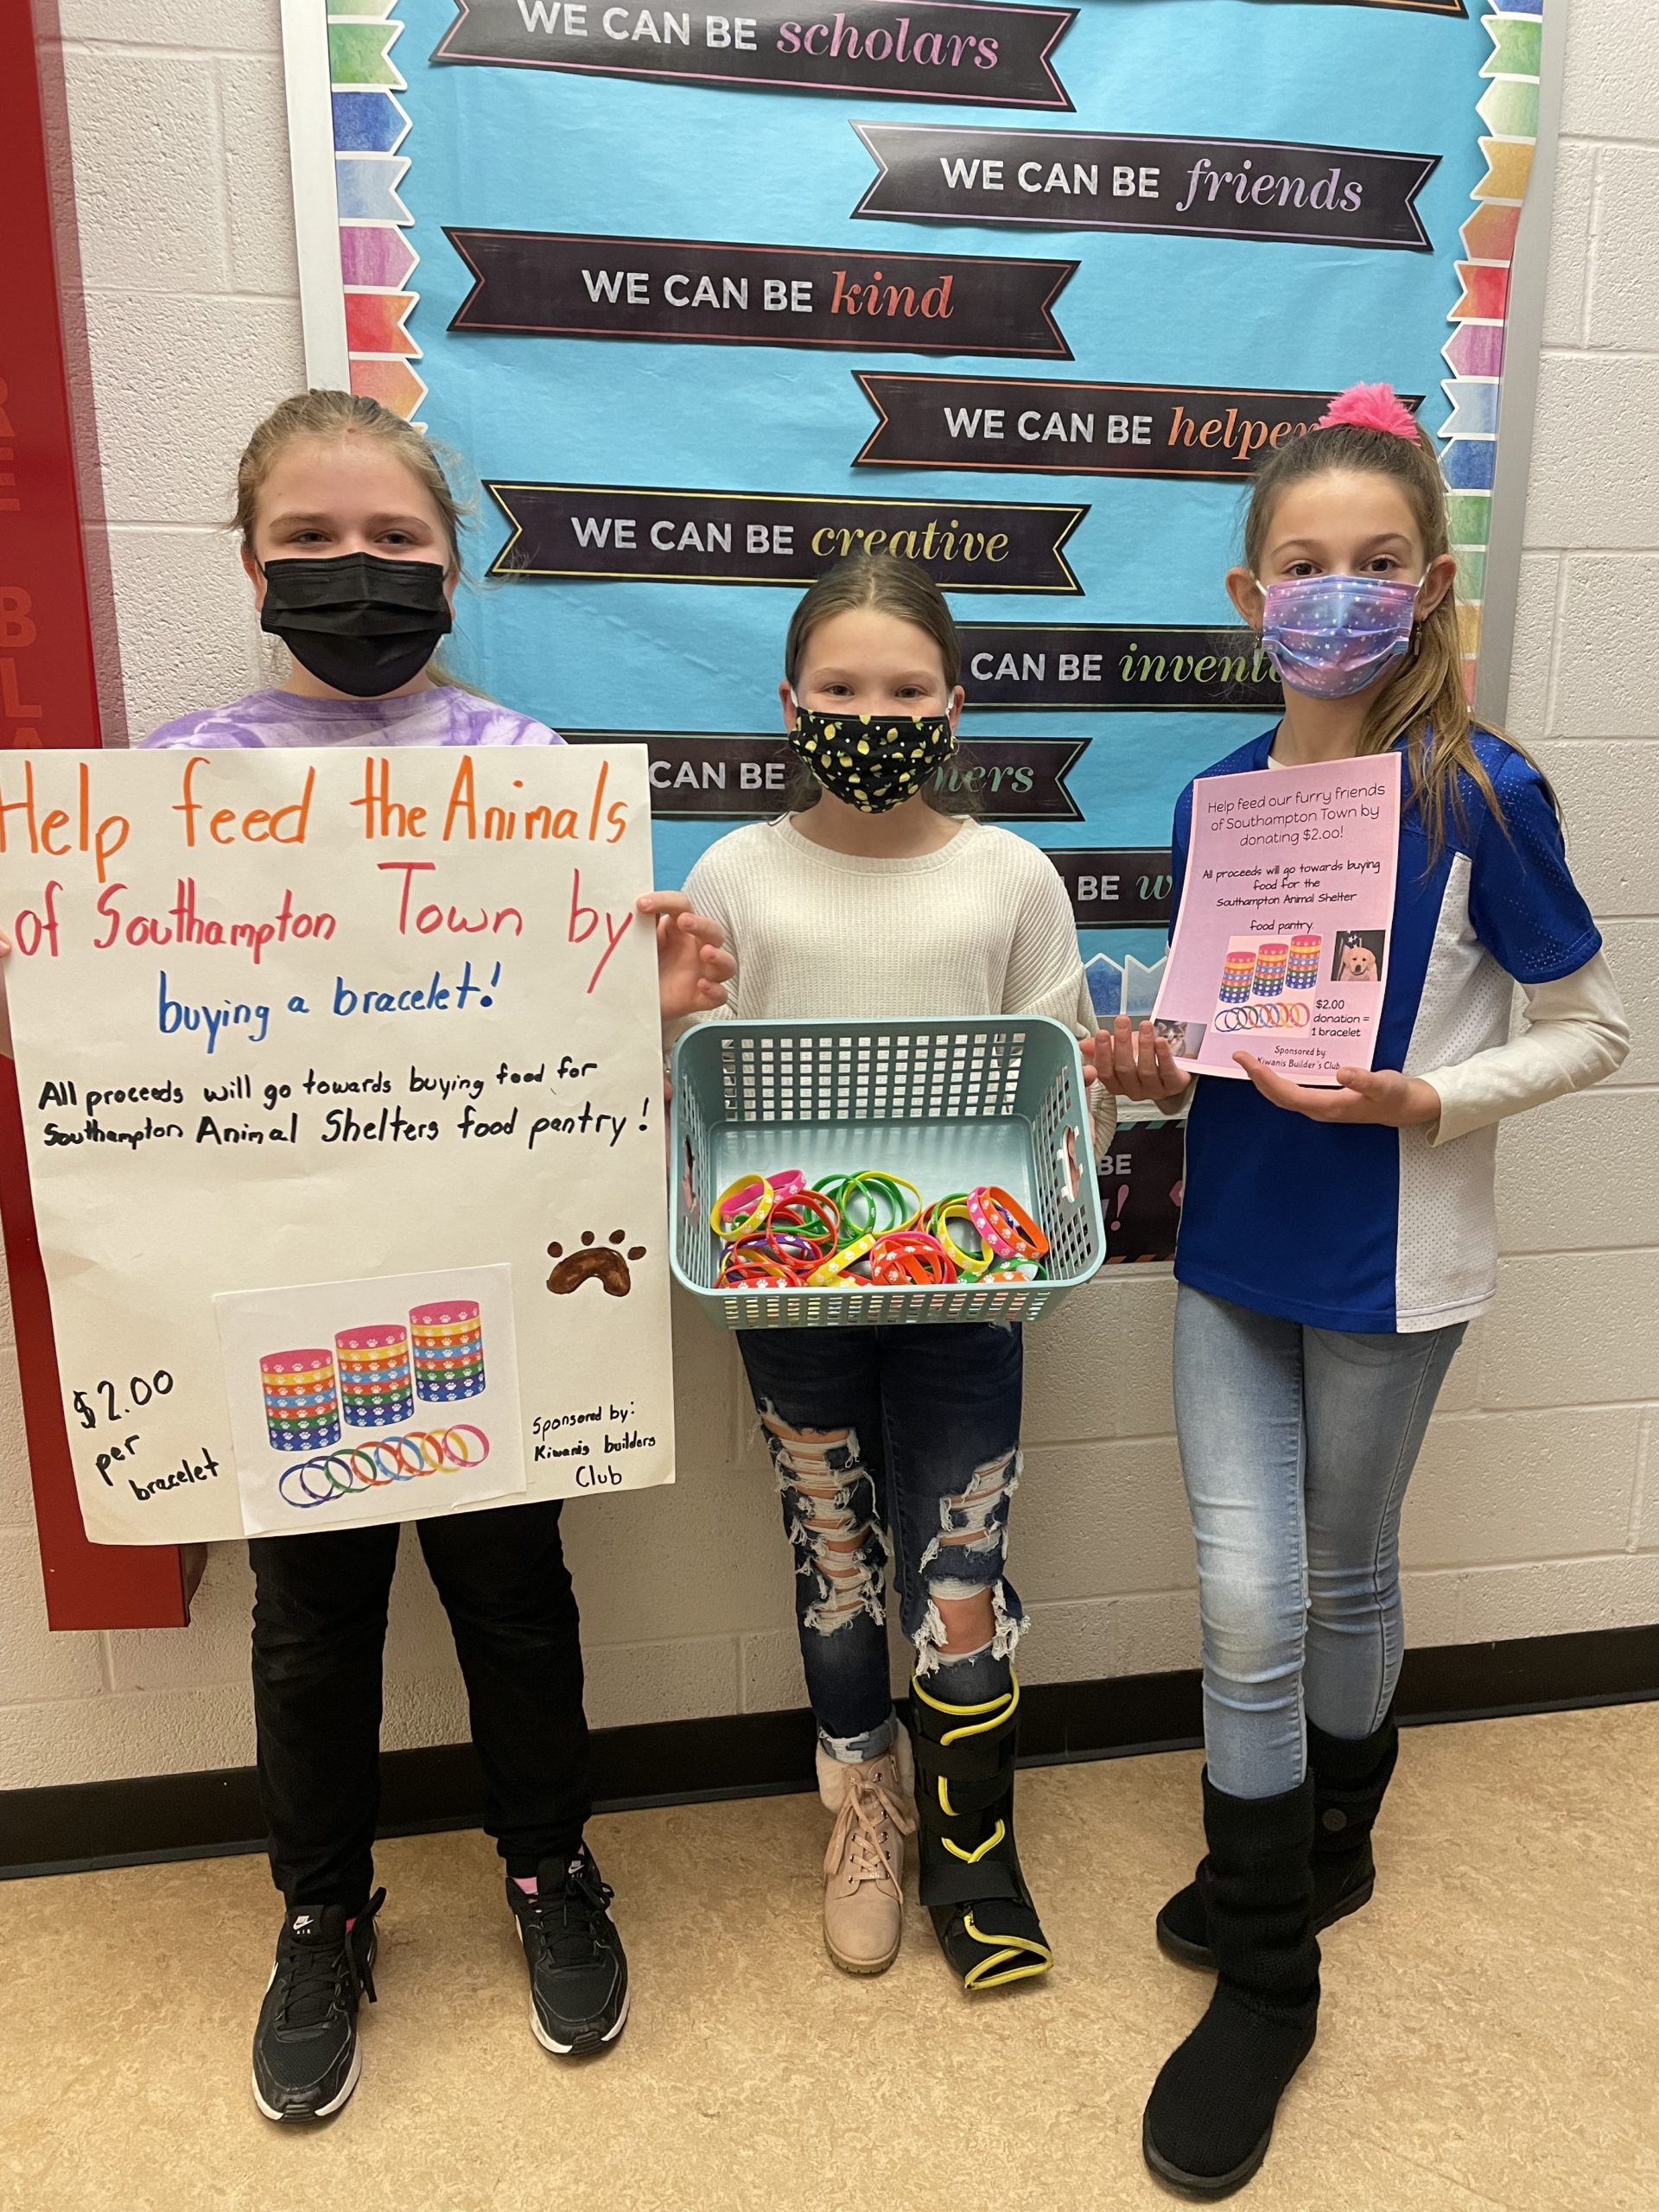 Throughout January,  members of the Hampton Bays Middle School Kiwanis Builder’s Club are raising money for  the Southampton Animal Shelter. Under the direction of advisers Erica Hayes and Jamie Huebner, the students are selling $2 paw print bracelets. The proceeds will go toward restocking the animal shelter’s food pantry.